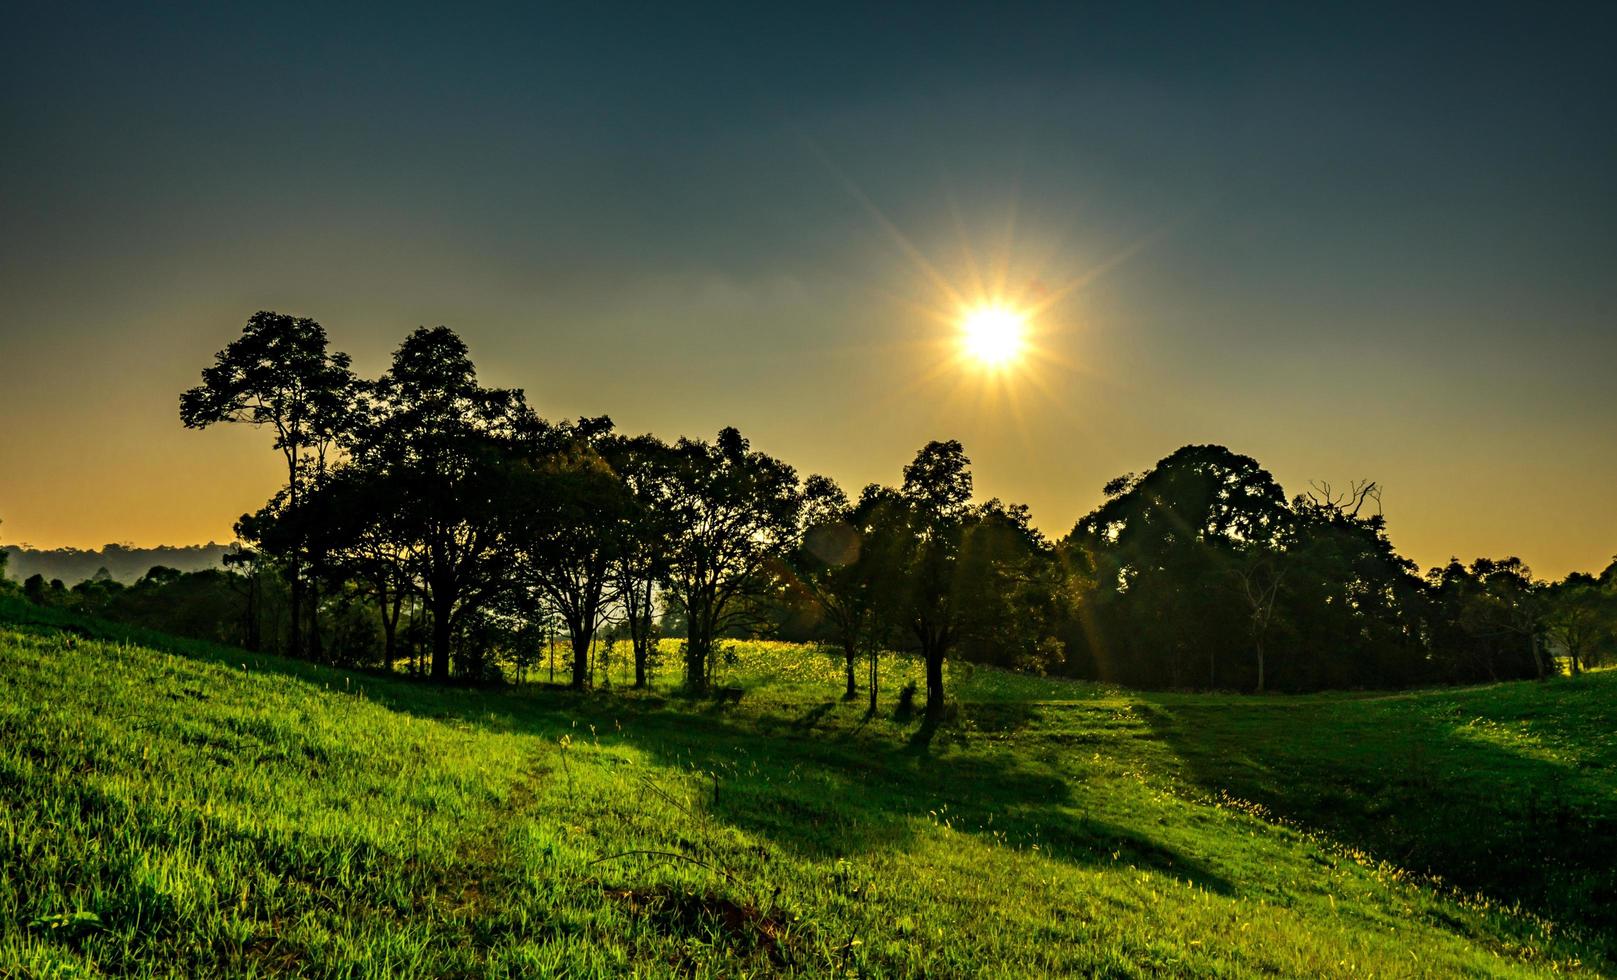 Landscape of beautiful sunset at the park with trees and green grass field with white flowers photo